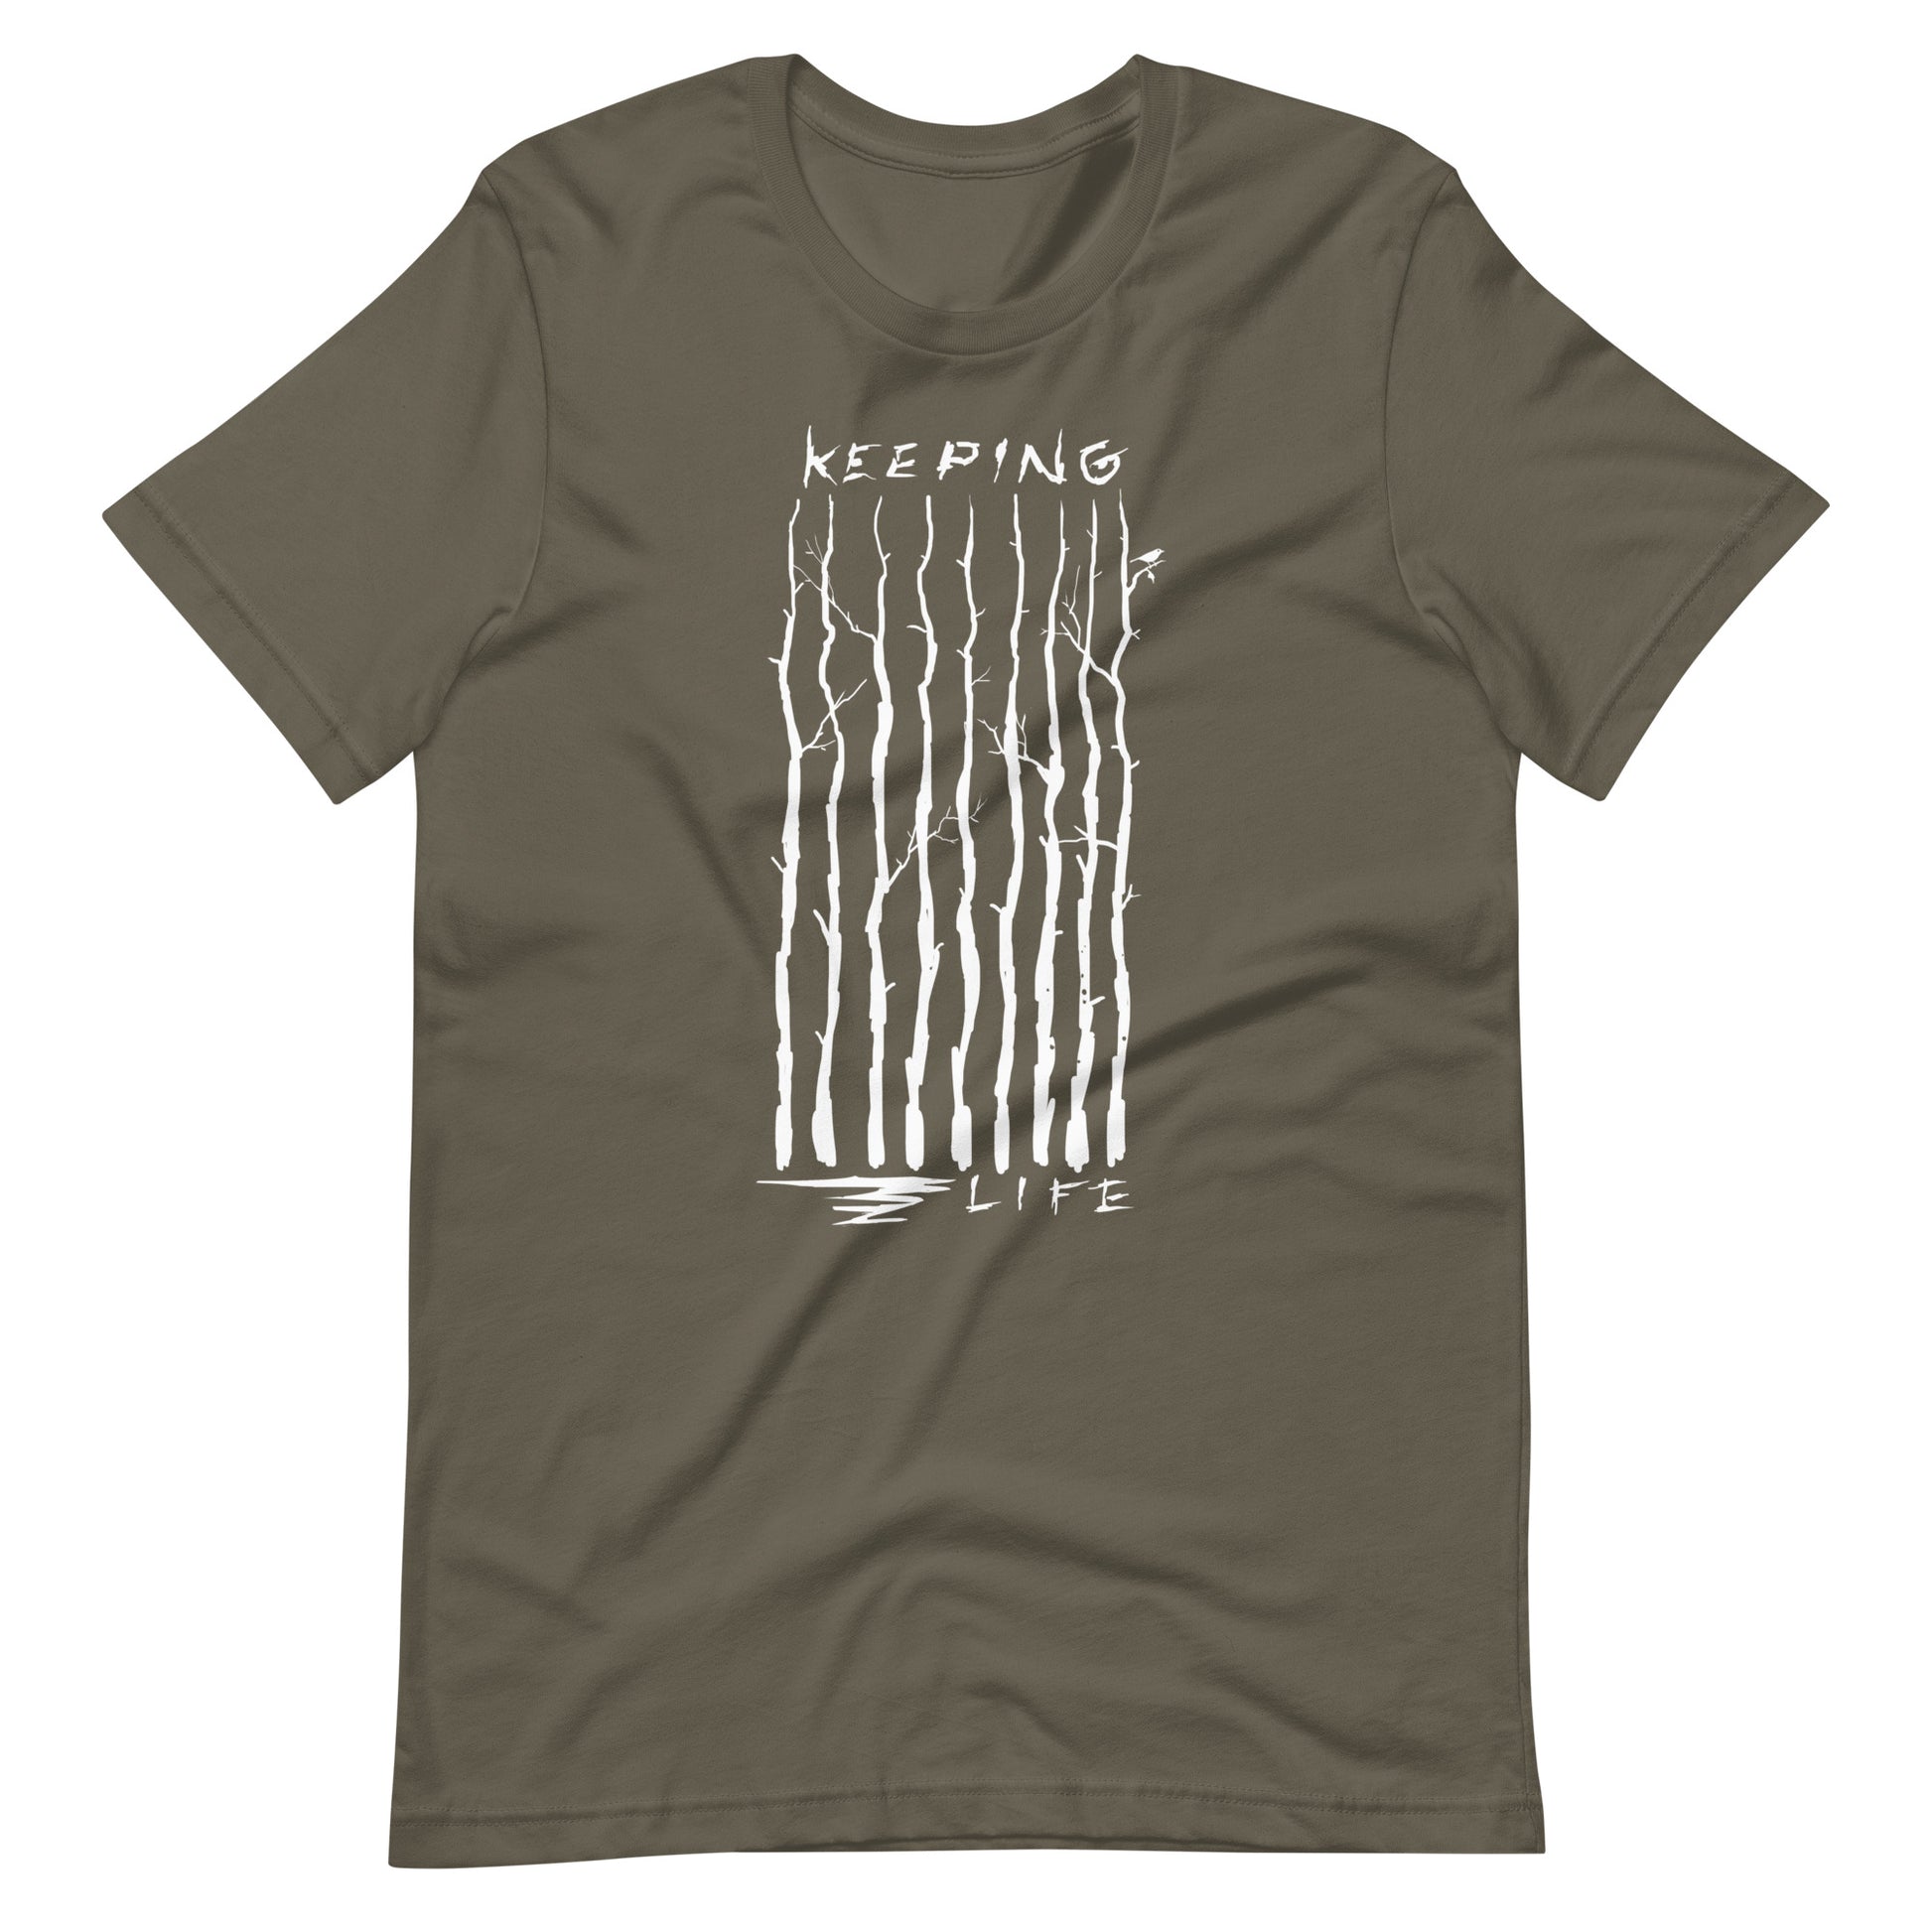 Keeping Lift - Men's t-shirt - Army Front